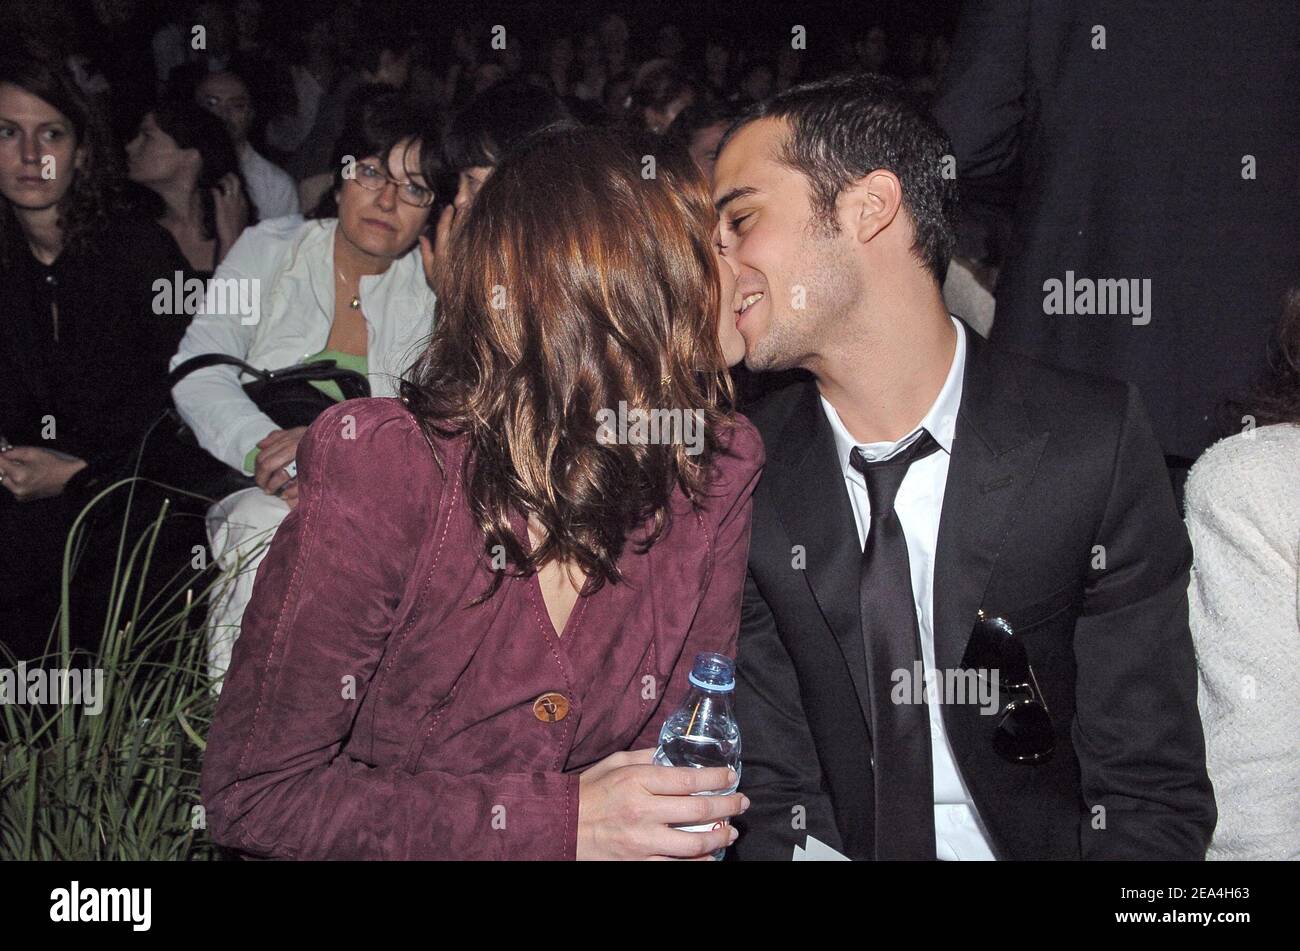 Drew Barrymore and her boyfriend Fabrizio Moretti attend the Christian Dior Haute-Couture Fall-Winter 2005-2006 collection presentation in Paris, France, July 6, 2005. Photo by Klein-Nebinger/ABACAPRESS.COM Stock Photo